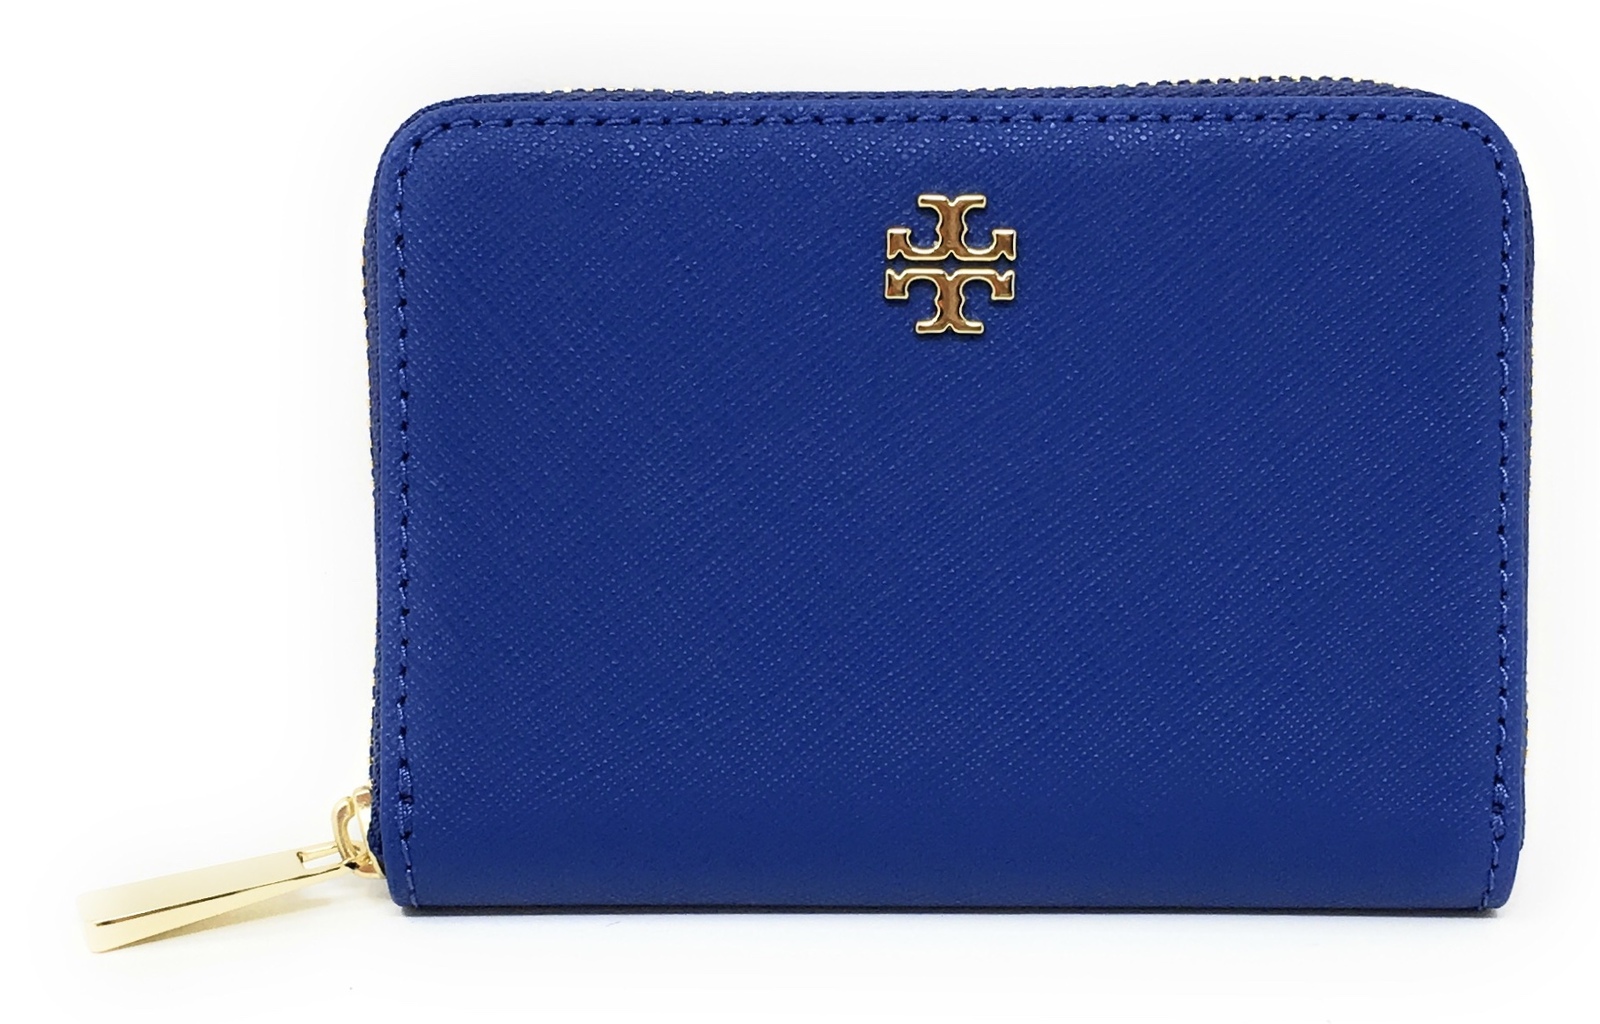 AUTH NWT Tory Burch Emerson Small Saffiano Leather Swingpack